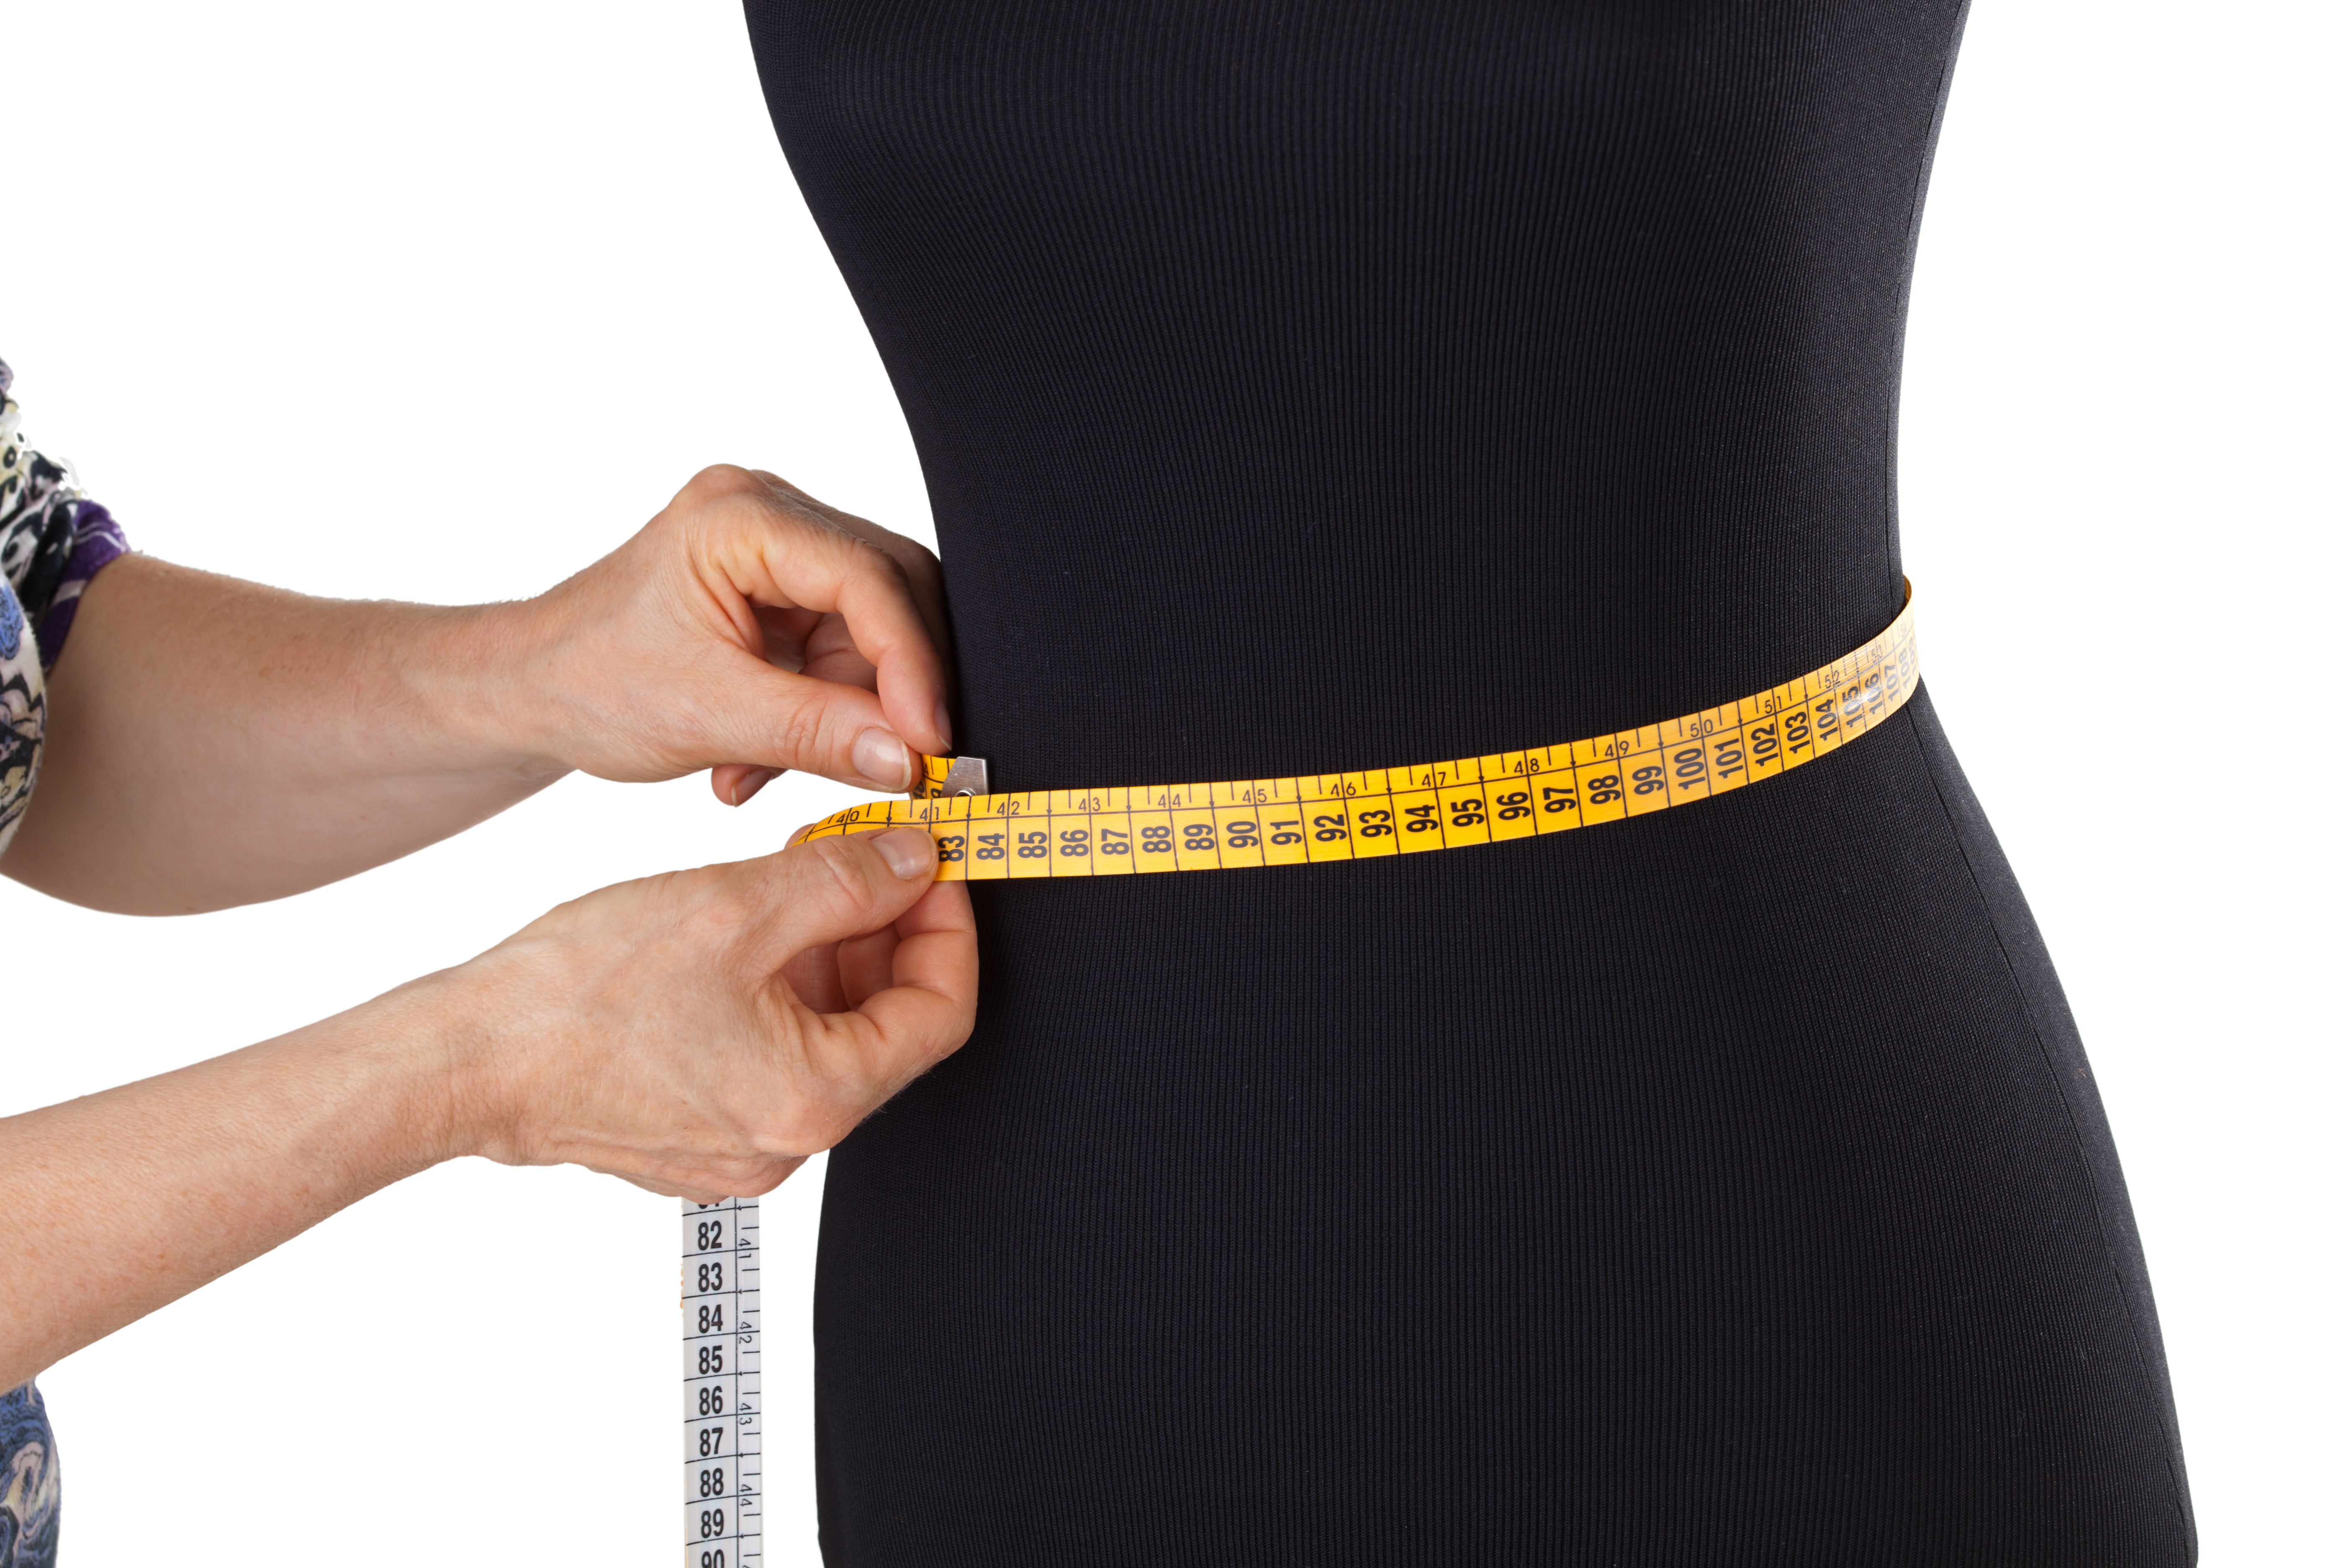 Tips On How To Take Your Own Clothing Measurements At Home